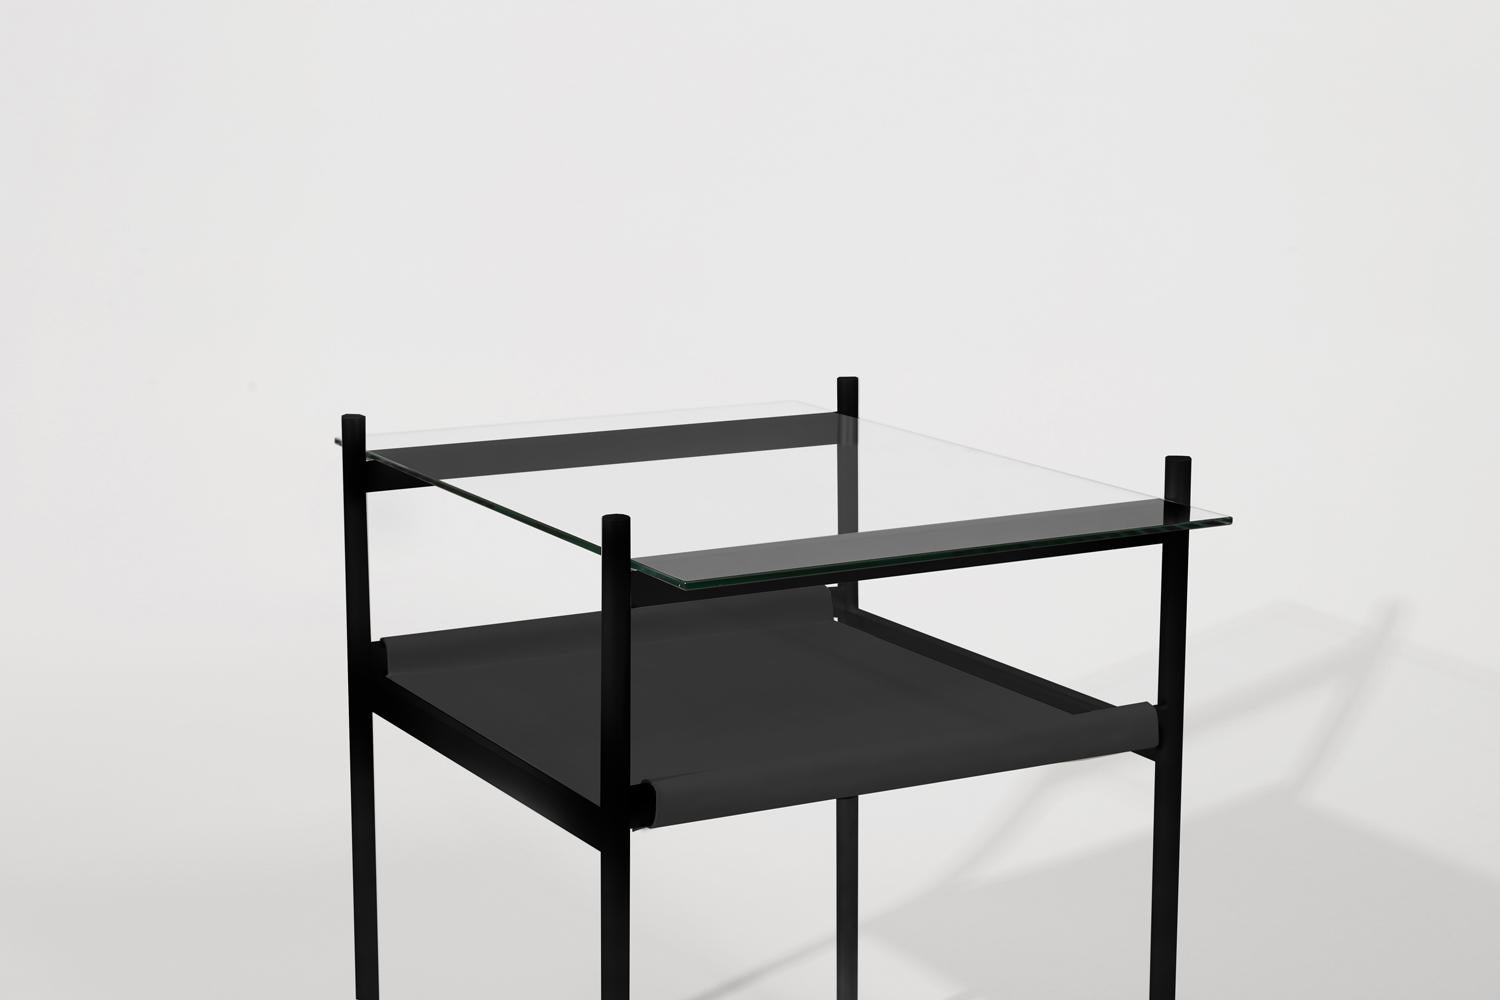 Made to order. Please allow six weeks for production.

Black Frame / Clear Glass / Black Leather Sling

The Duotone Furniture series is based on a modular hardware system that pairs sturdy construction with visual lightness and a range of